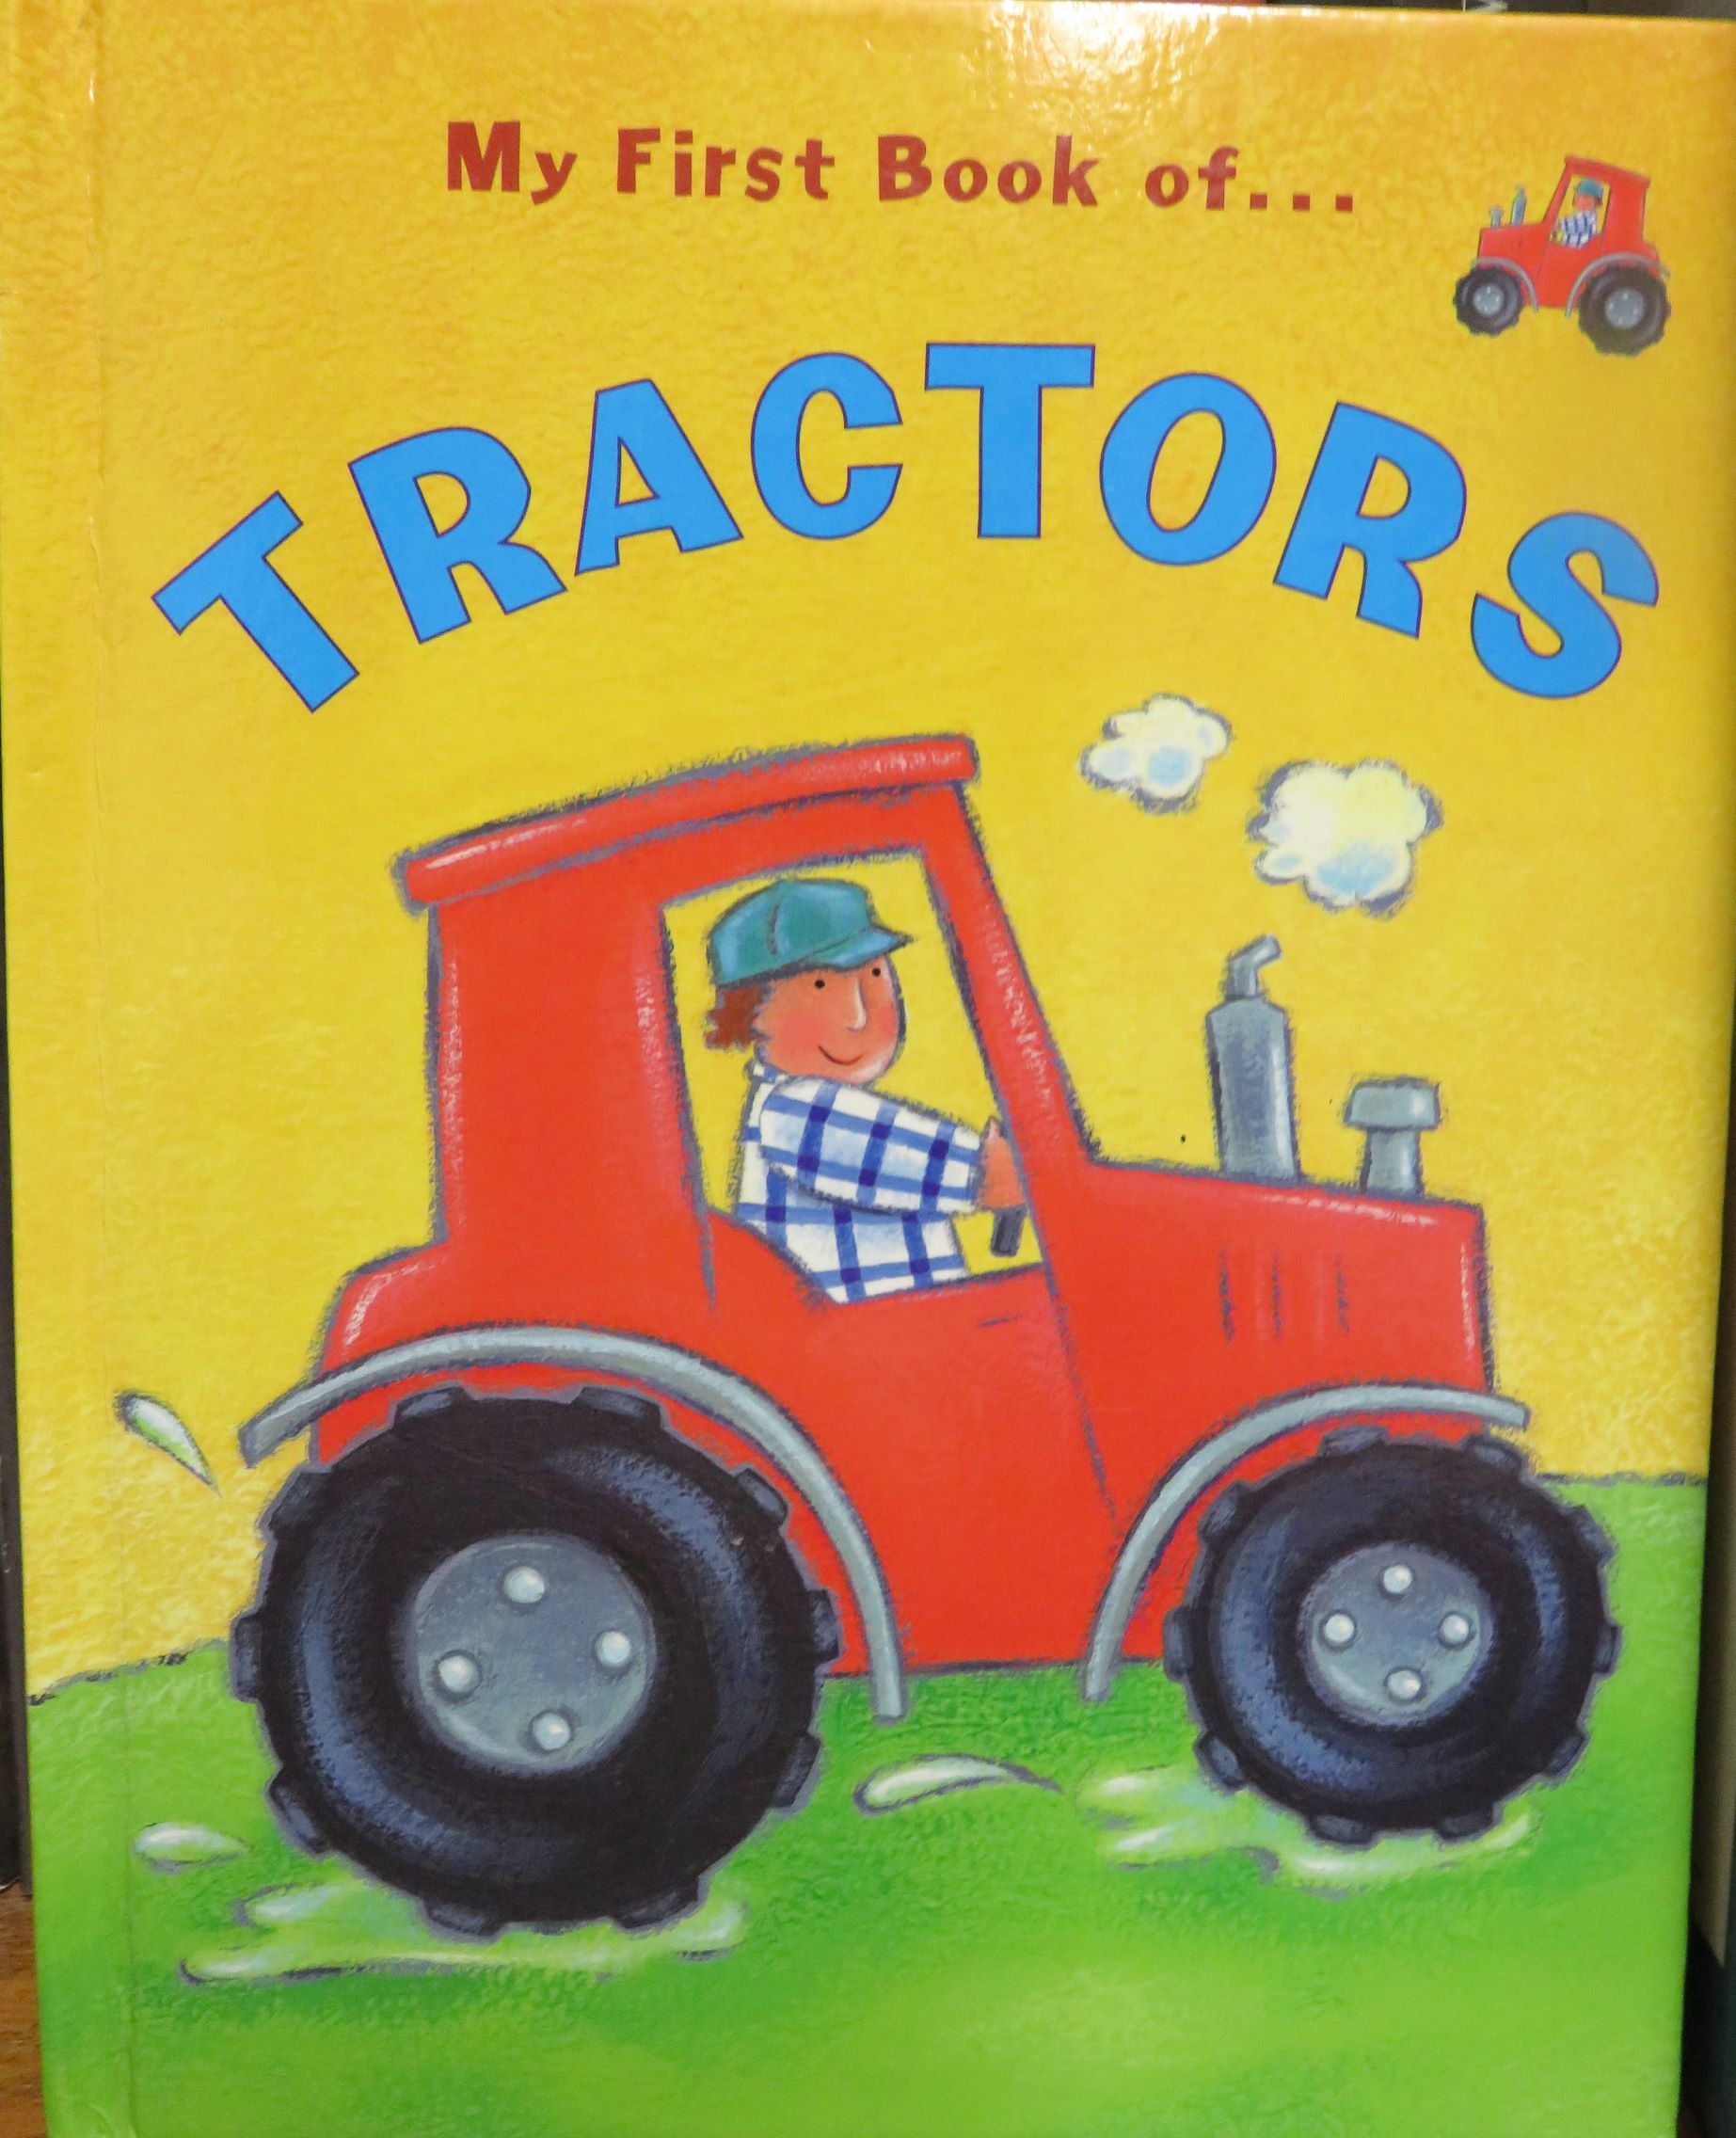 My First Book of Tractors